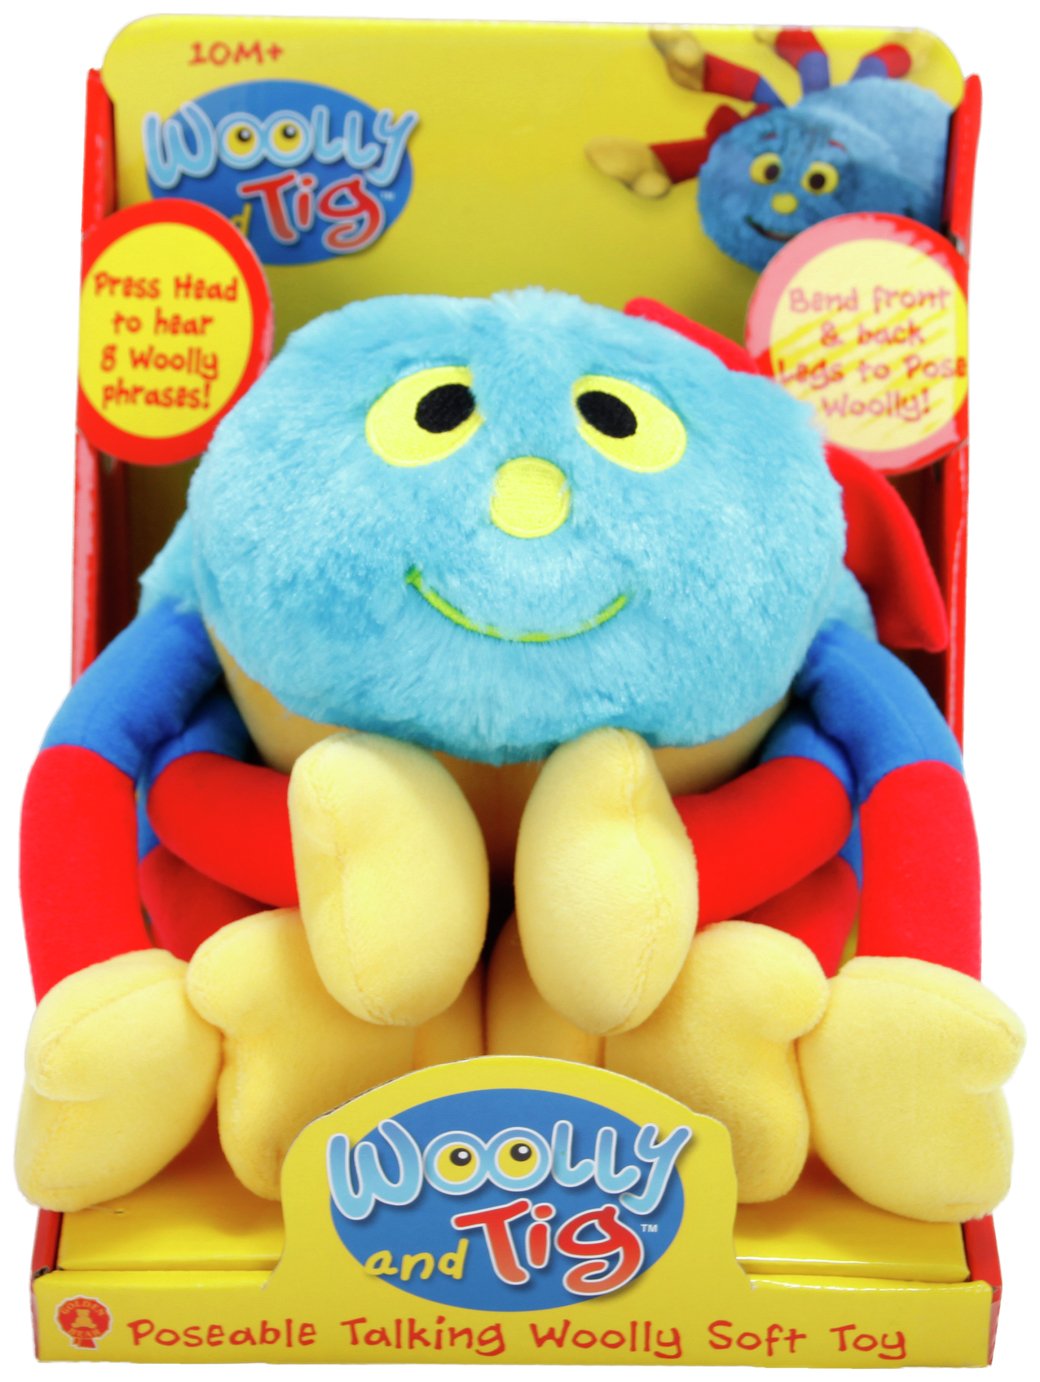 Woolly and Tig Poseable Talking Woolly Soft Toy. Reviews